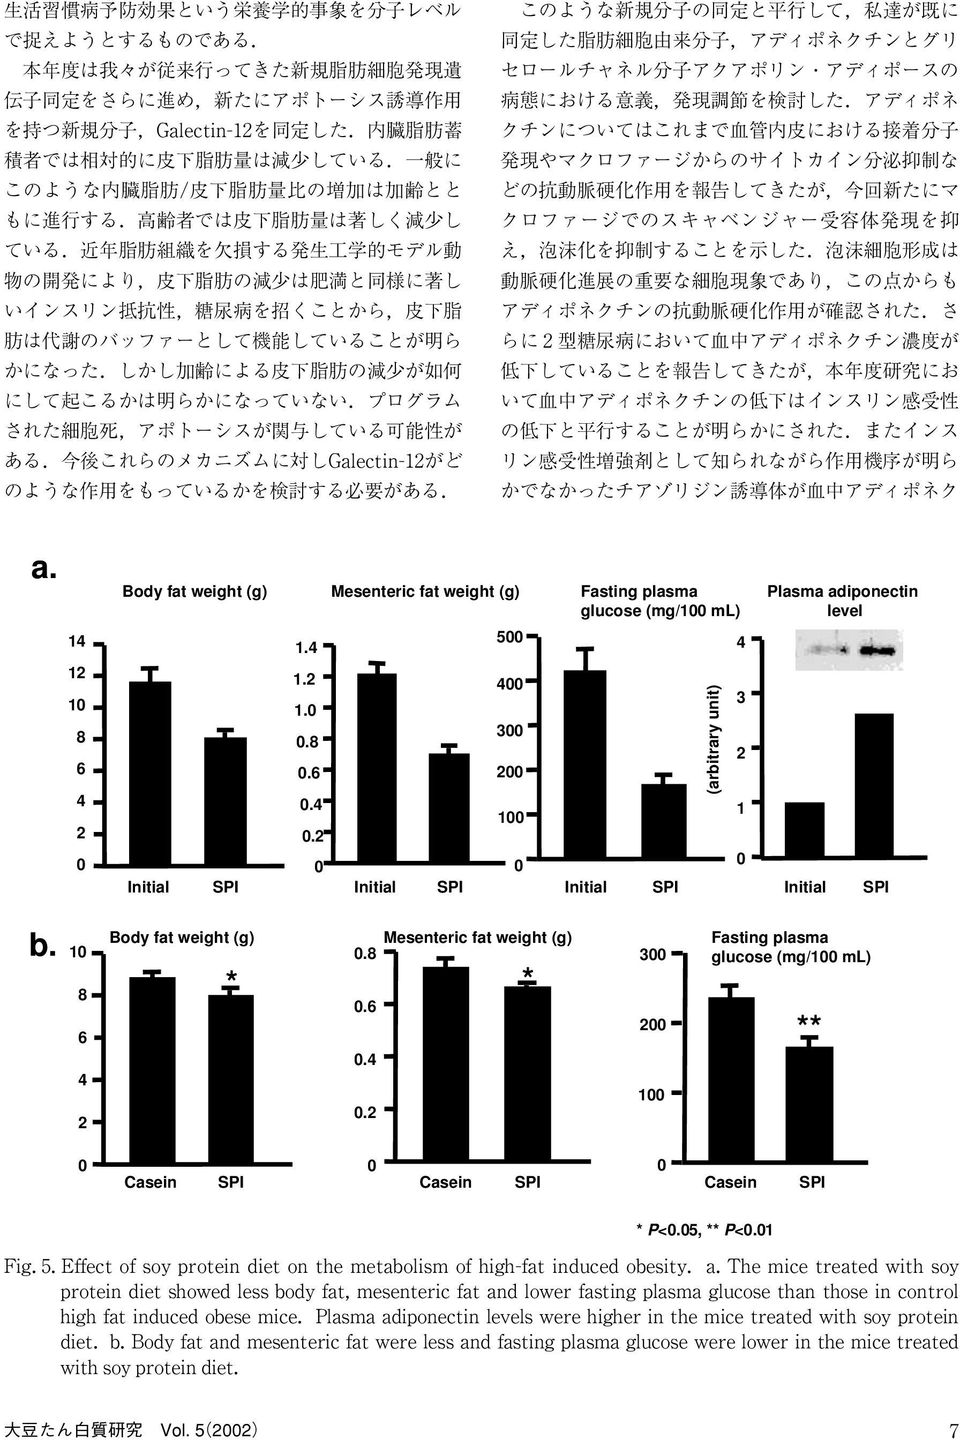 . Effect of soy protein diet on the metabolism of high-fat induced obesity. a.